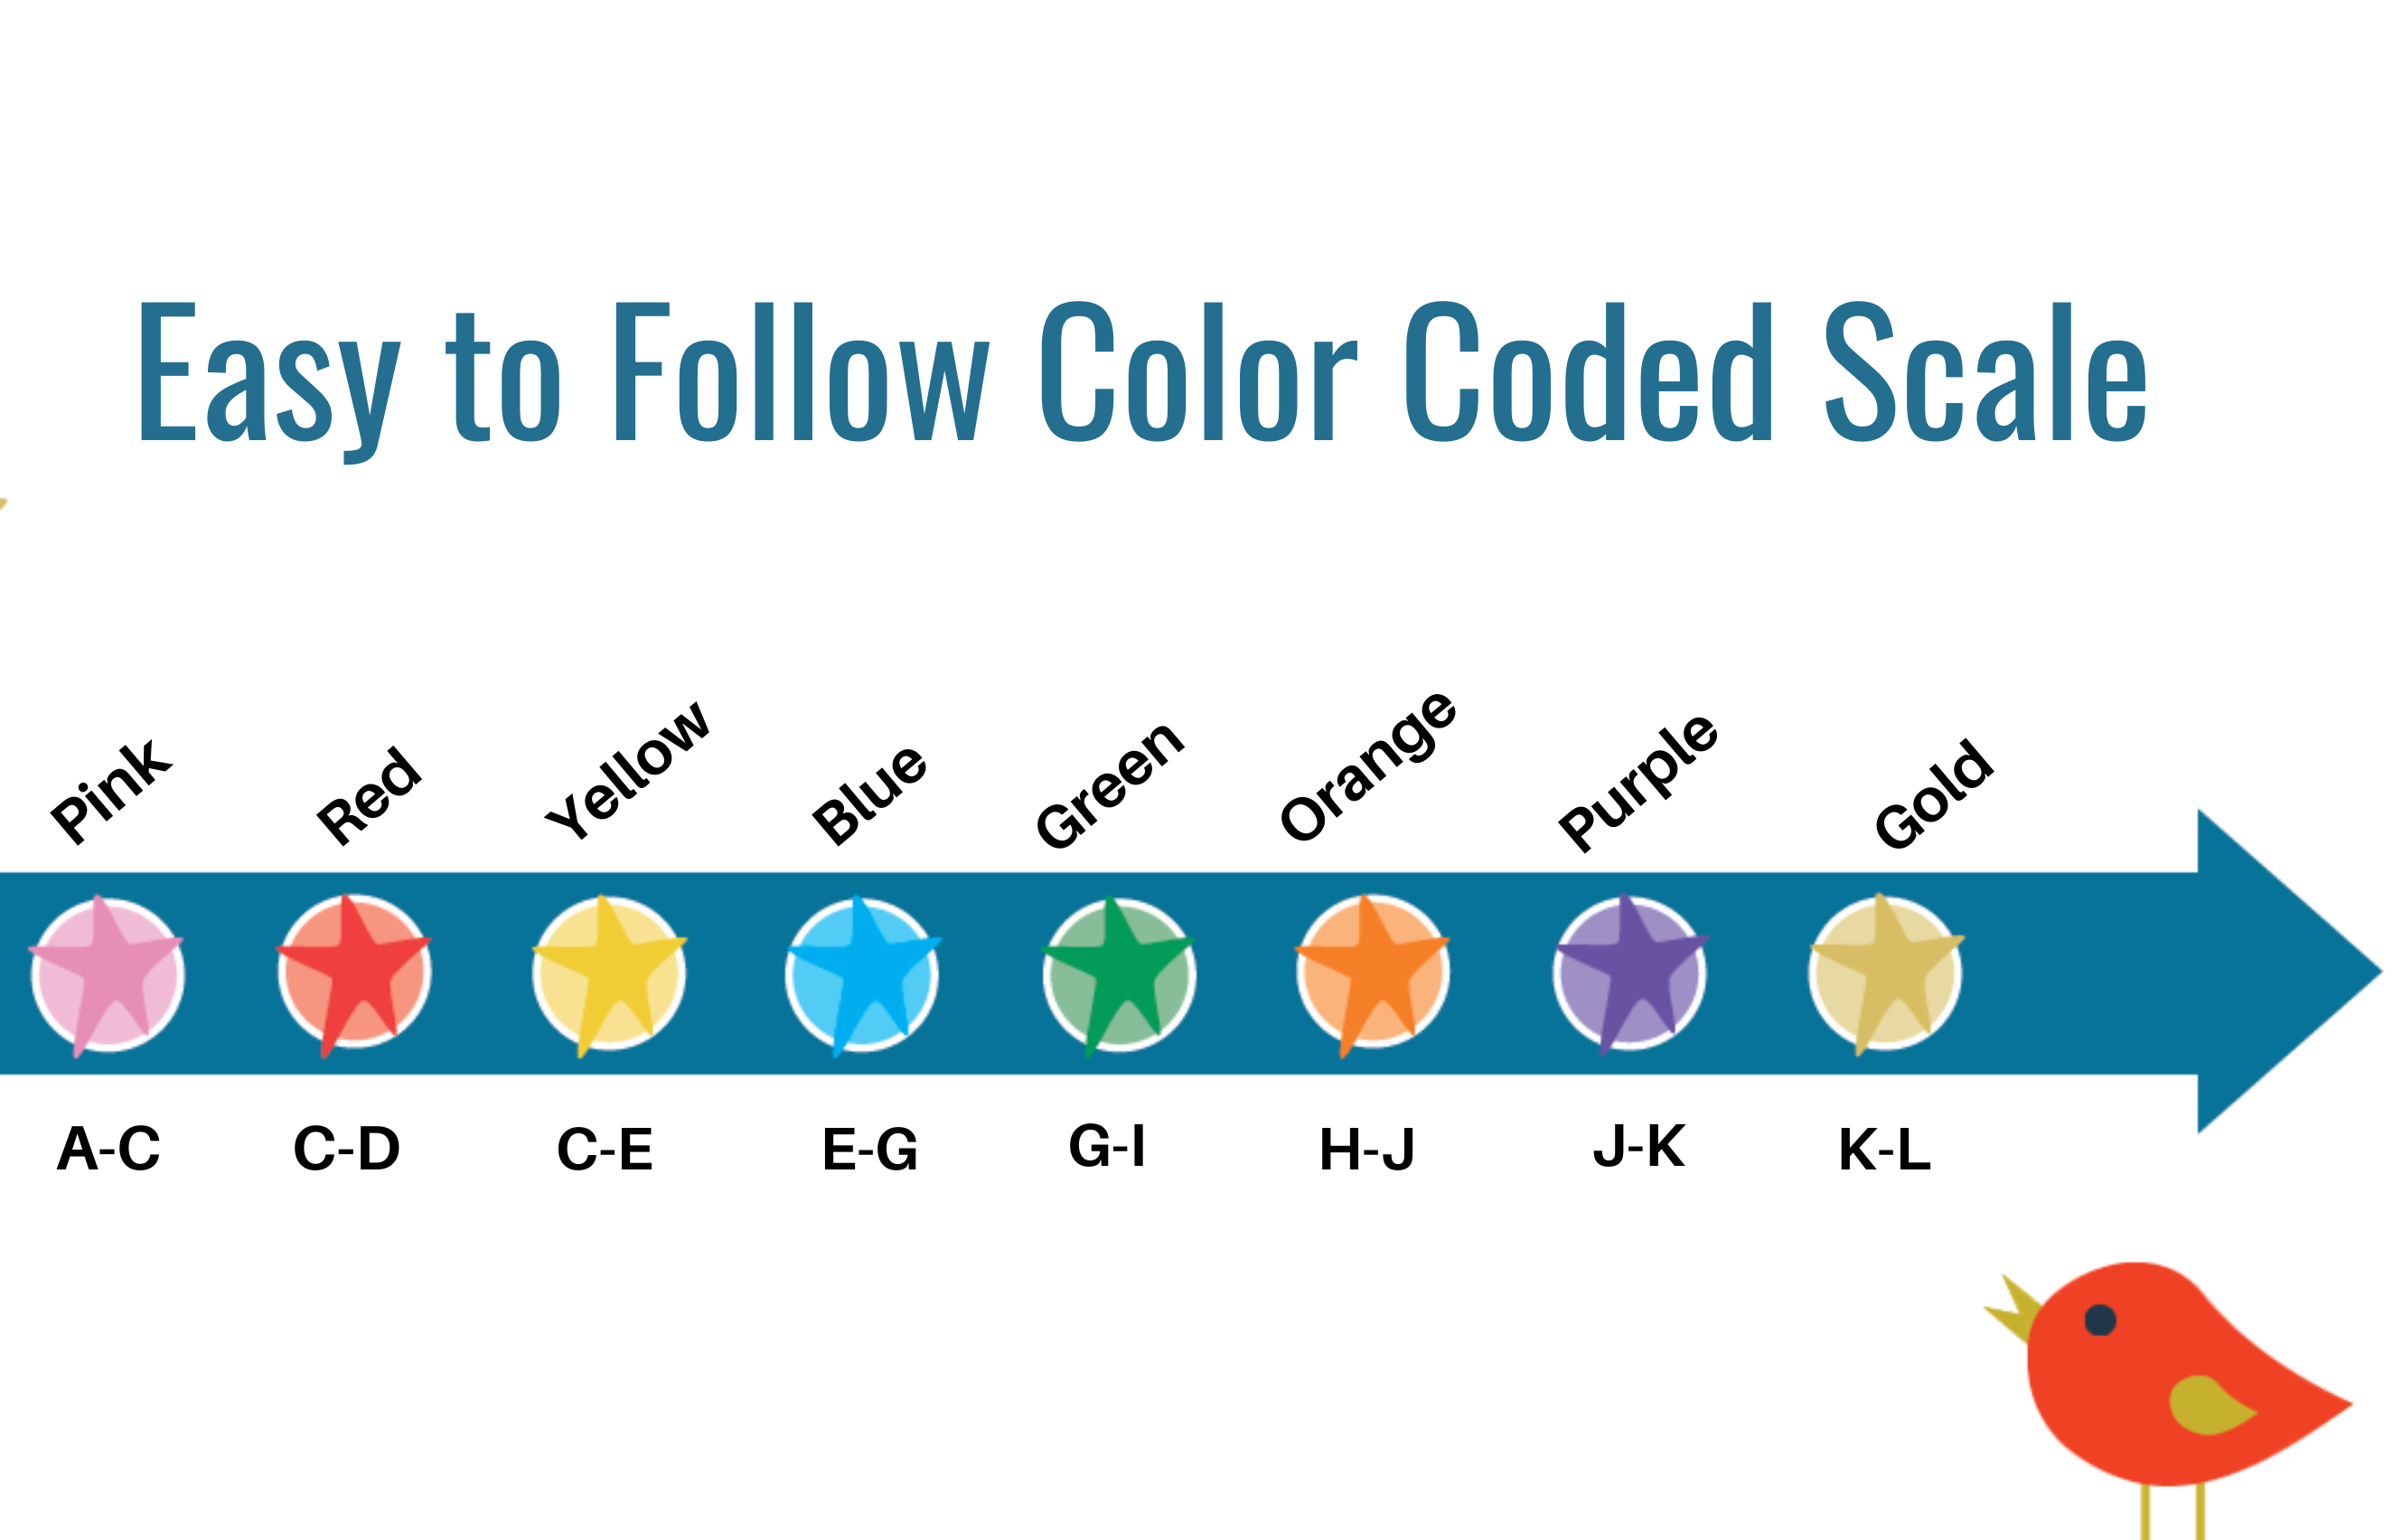 Easy to
Follow Color Coded Scale